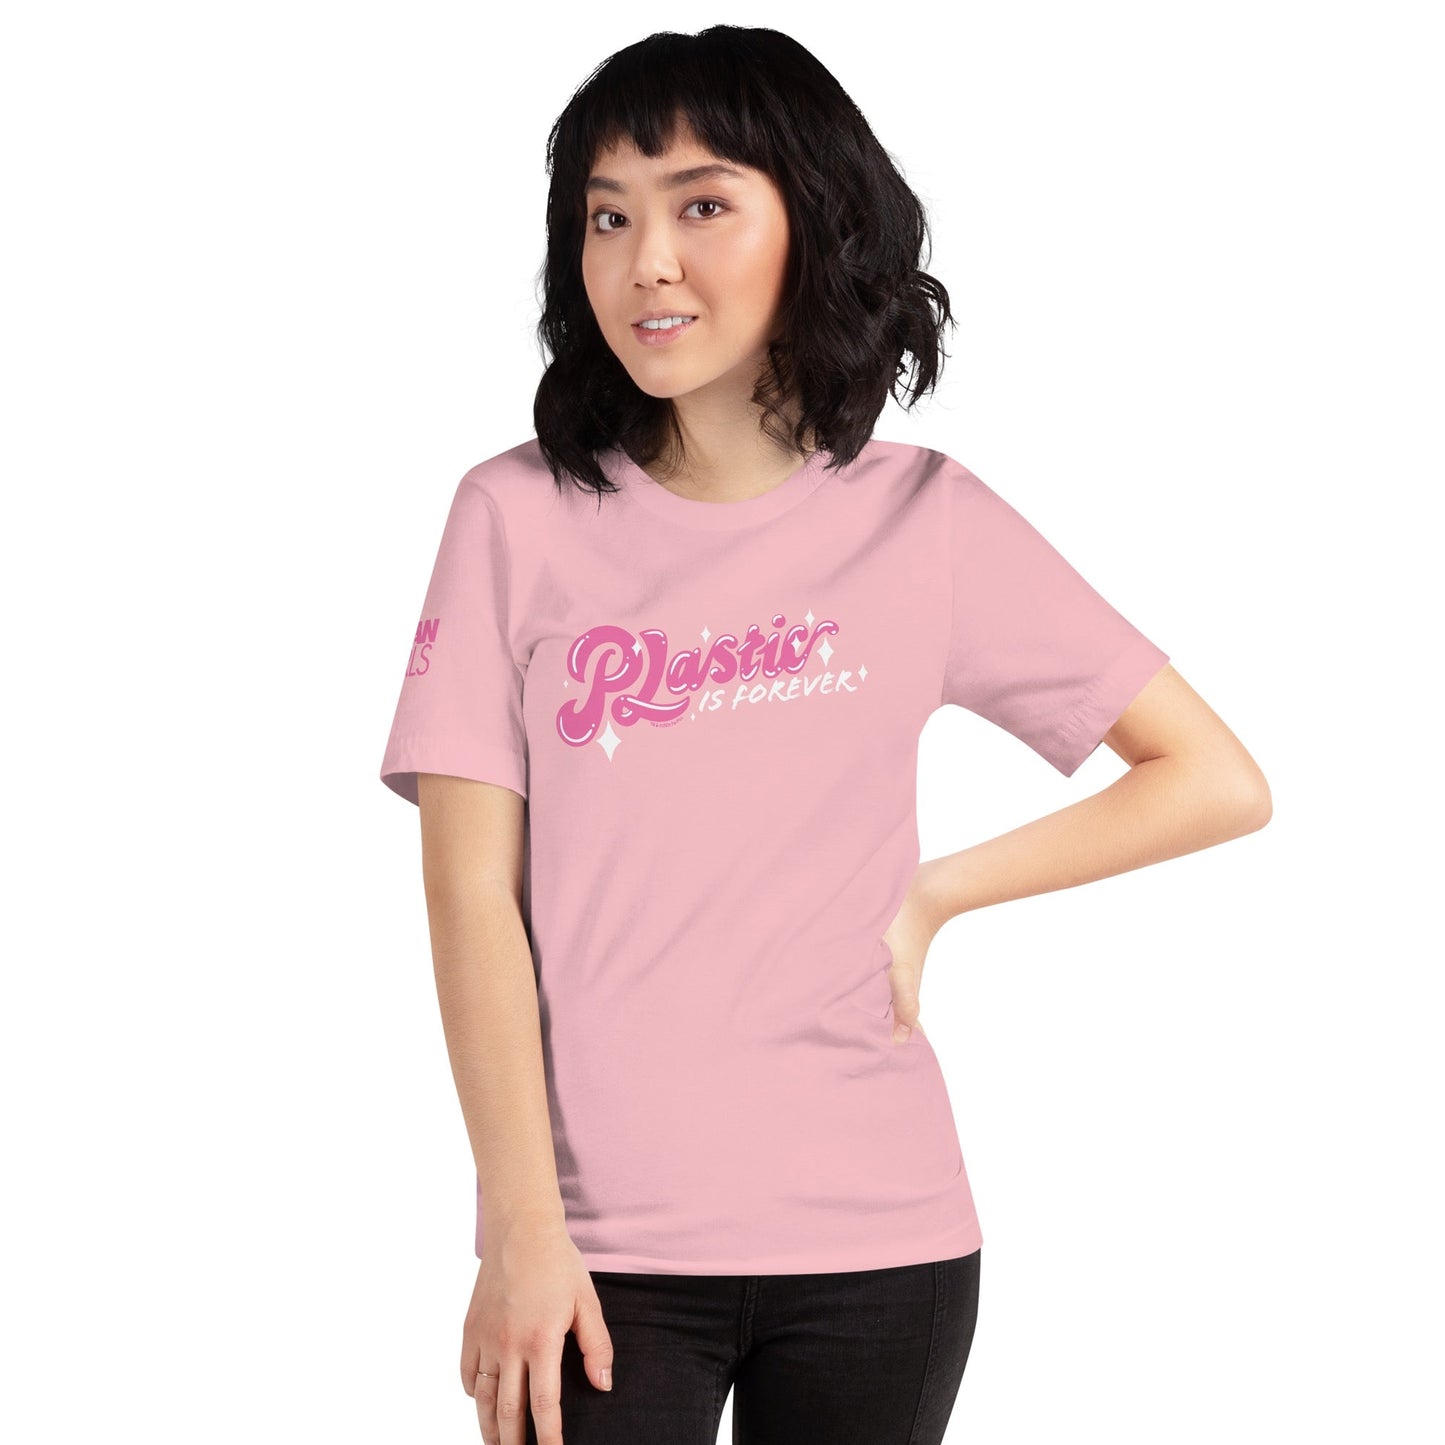 Mean Girls Musical Plastic Is Forever Adult T - Shirt - Paramount Shop